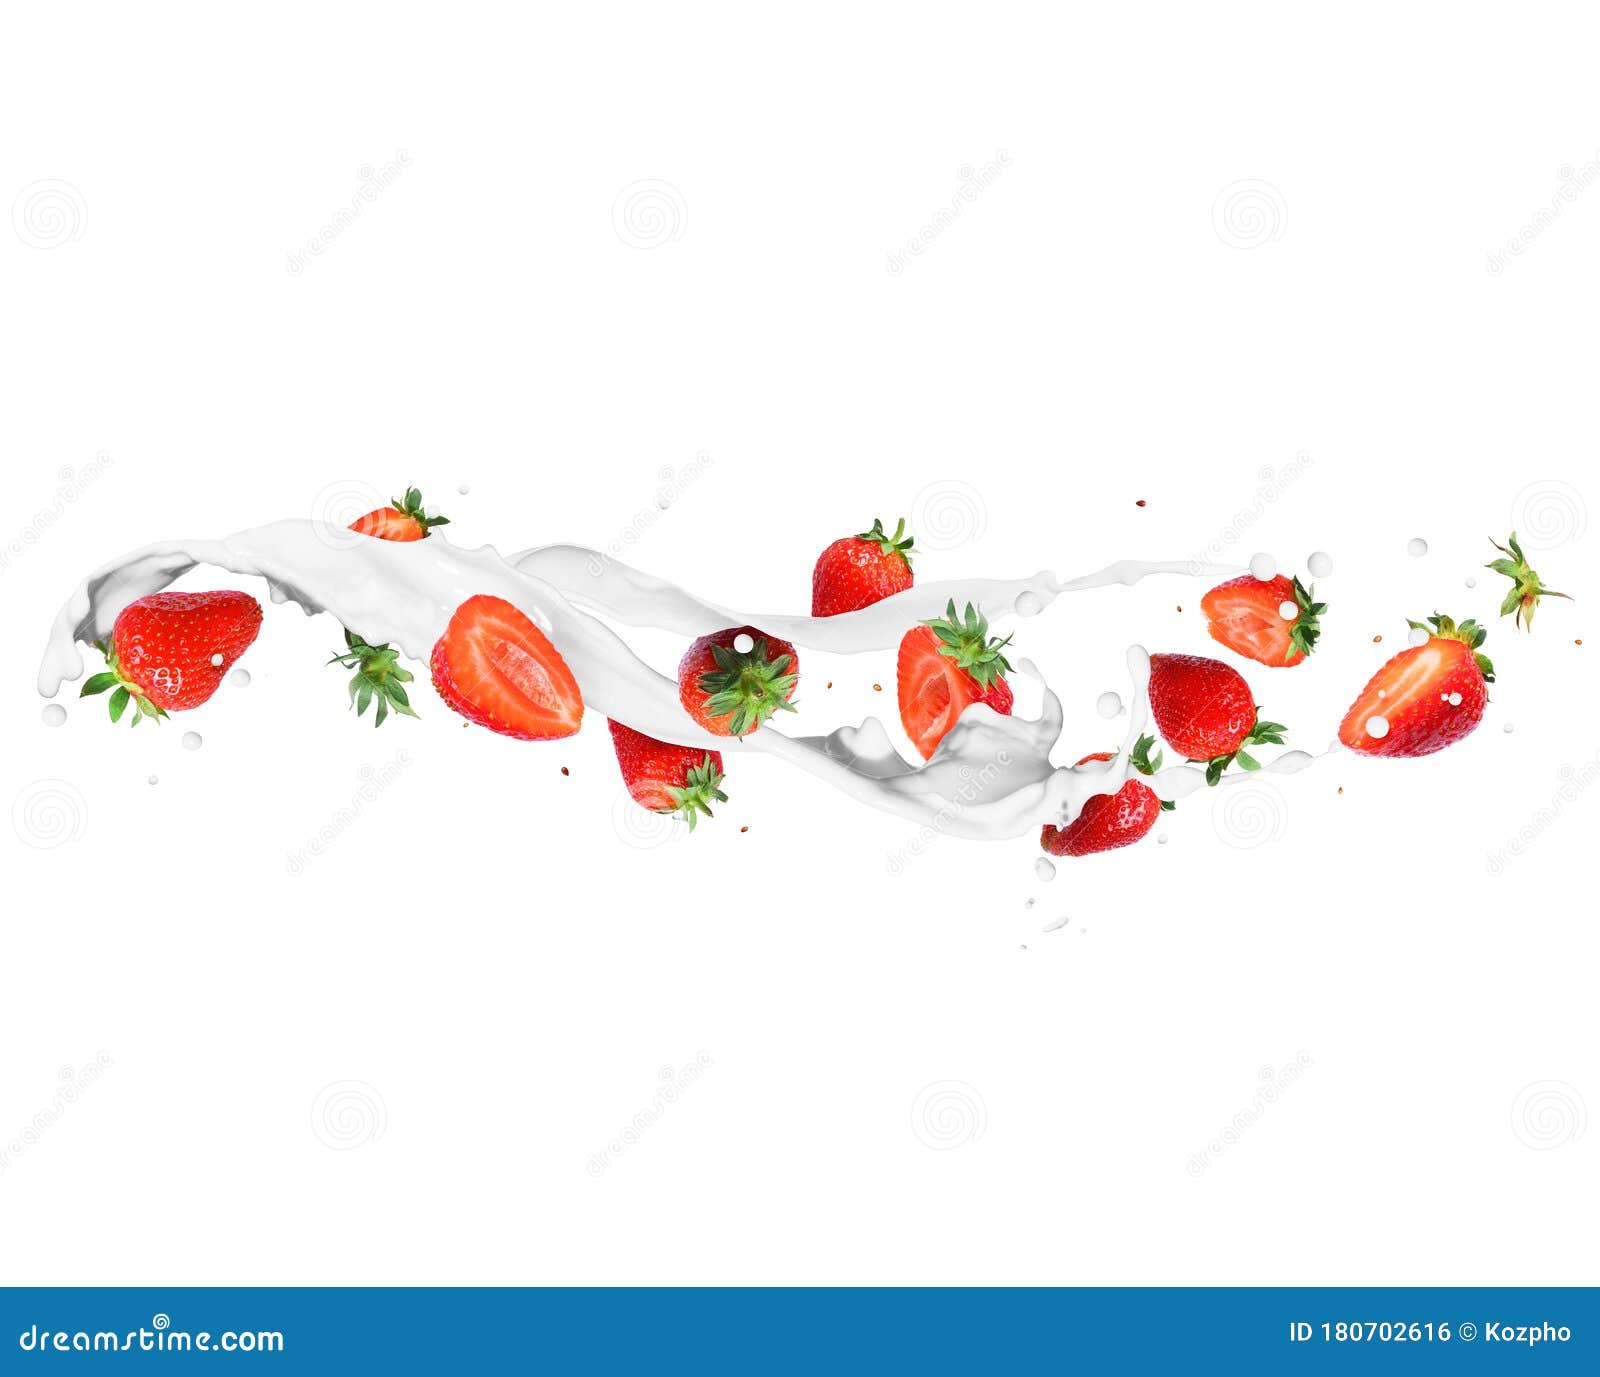 whole and sliced strawberries with milk splashes